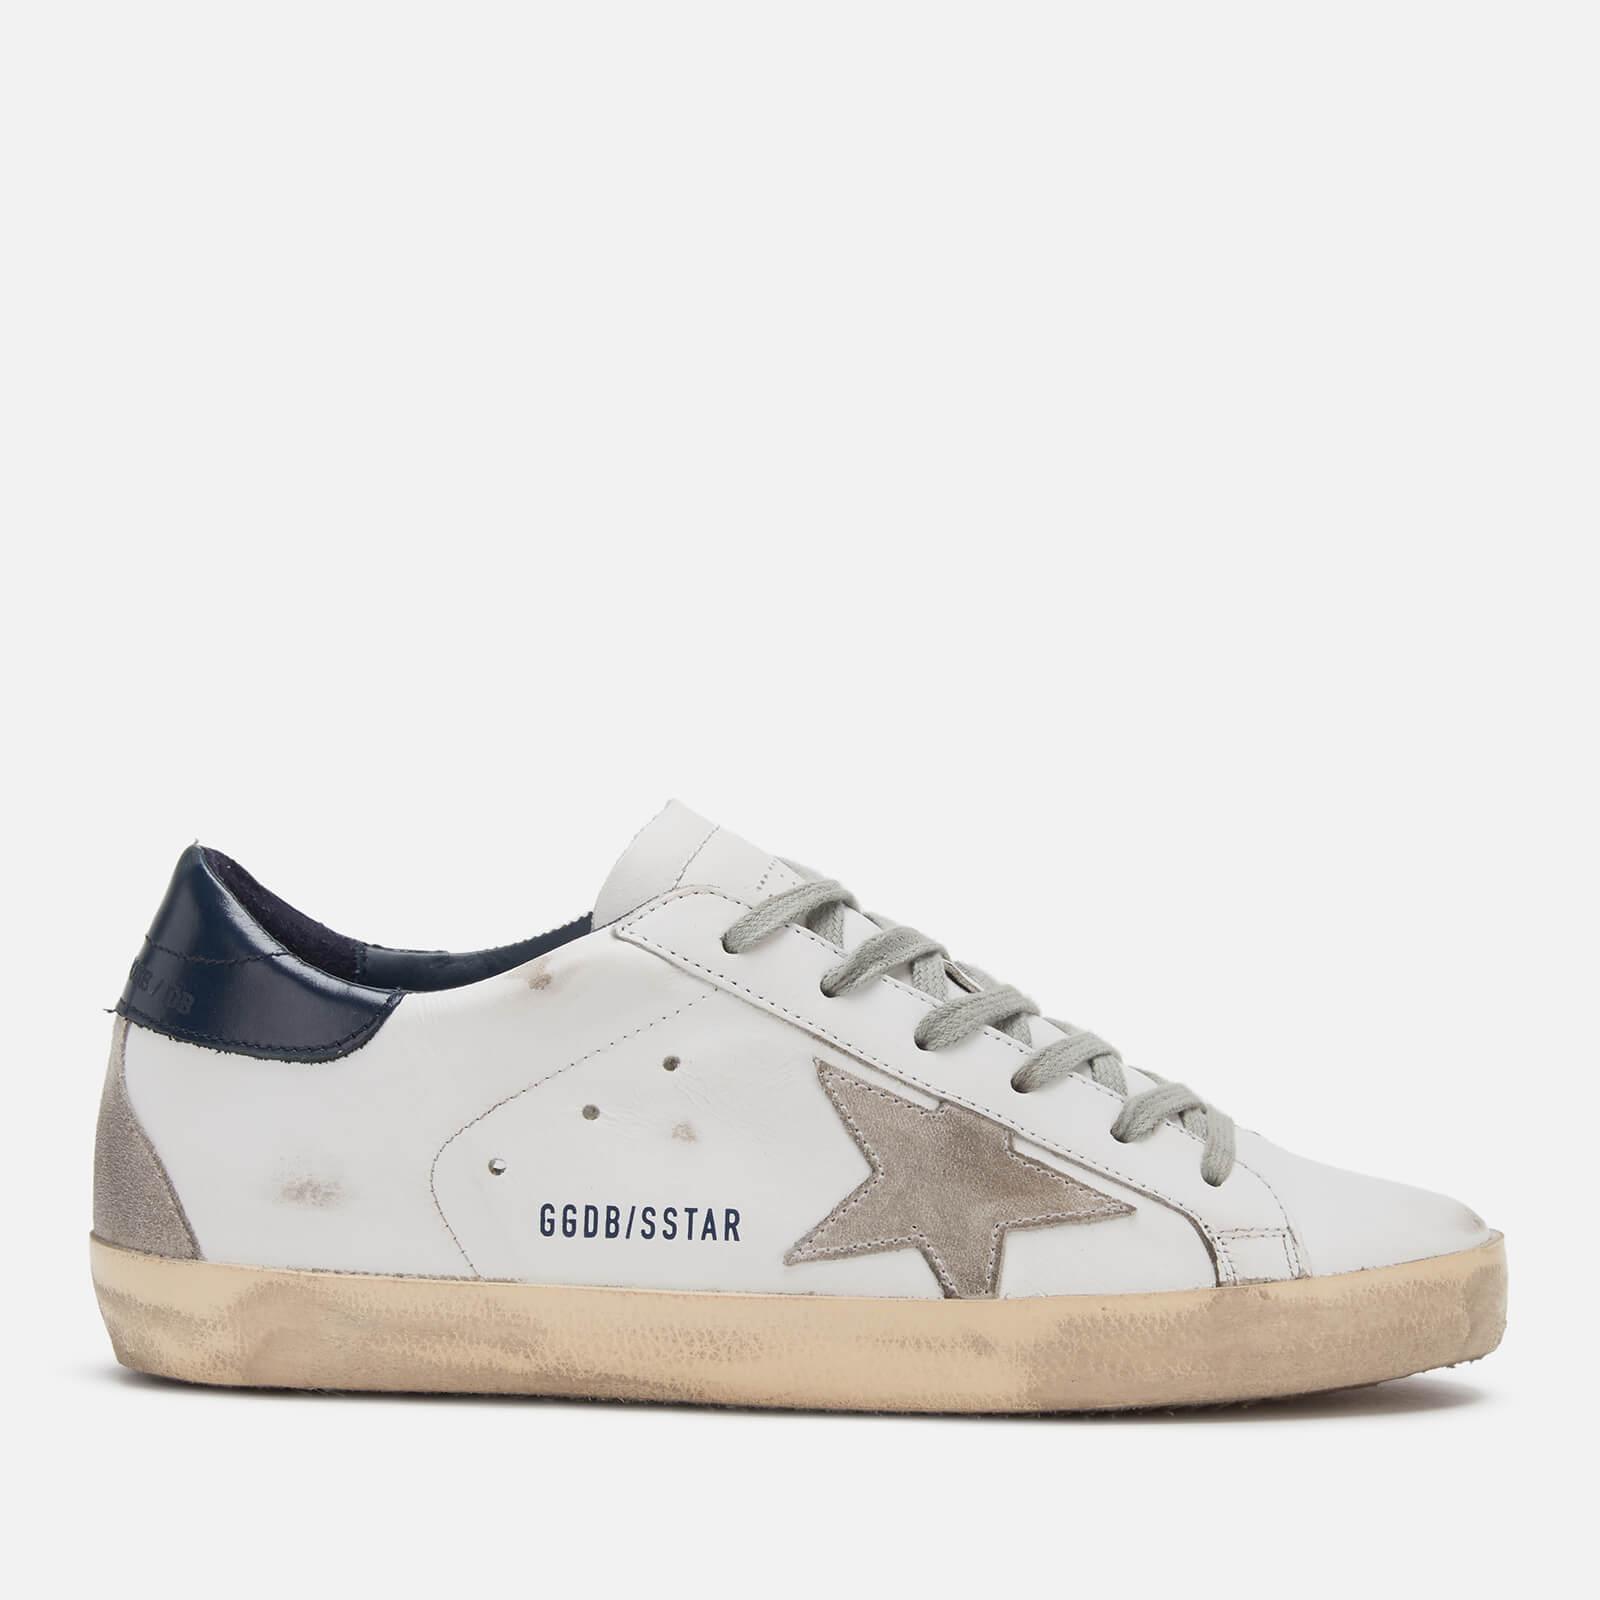 Golden Goose Deluxe Brand Goose Superstar Leather Trainers in White - Lyst